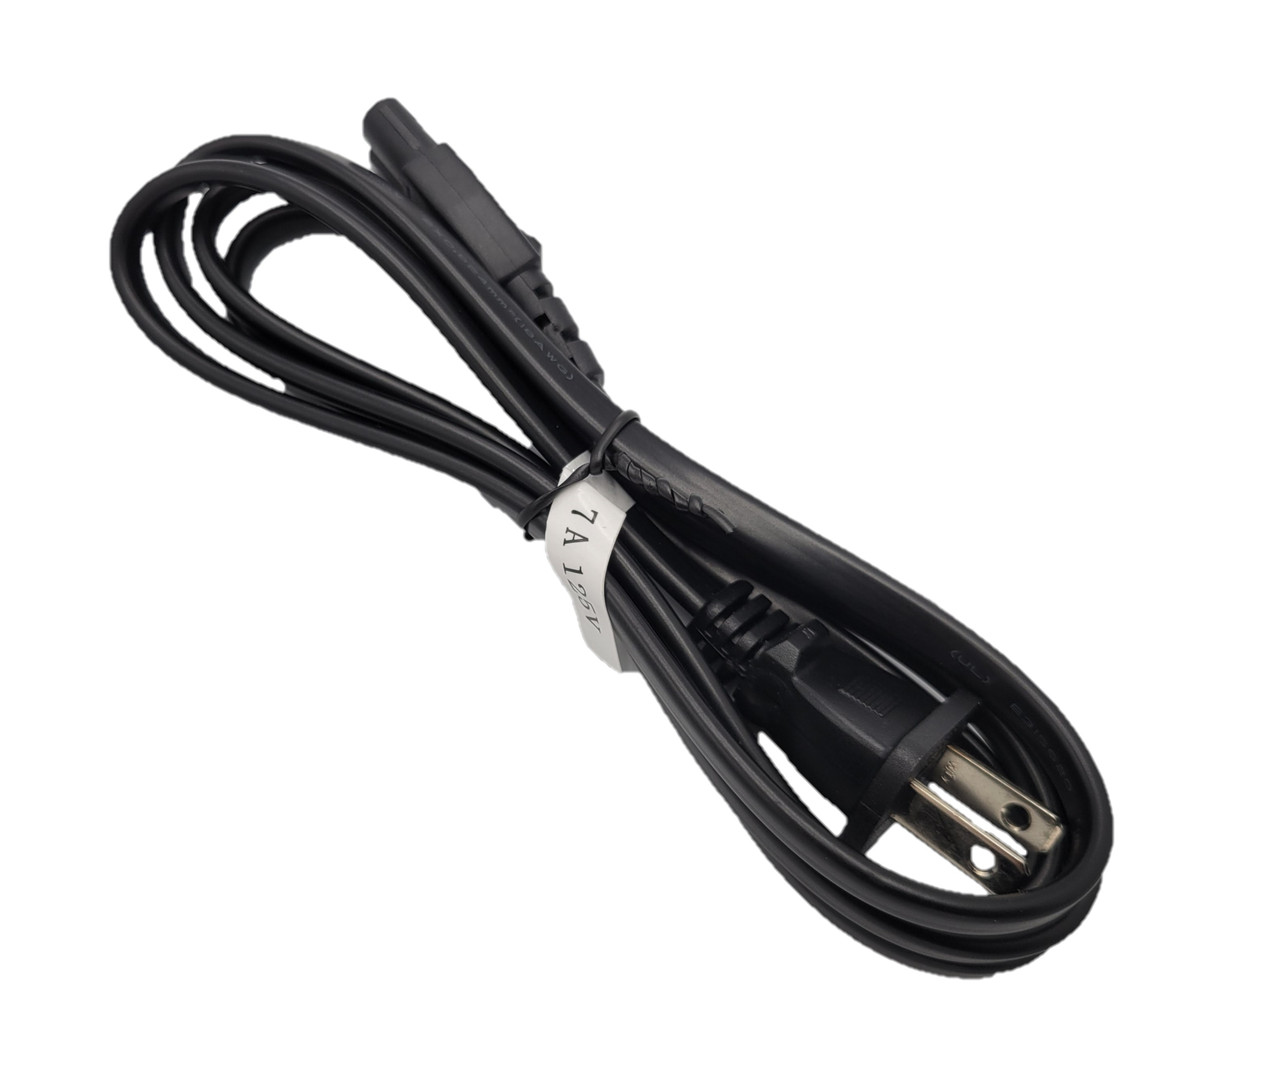 1.5 Meter Notebook AC Power Cord 2-Prong (18 AWG) Black 